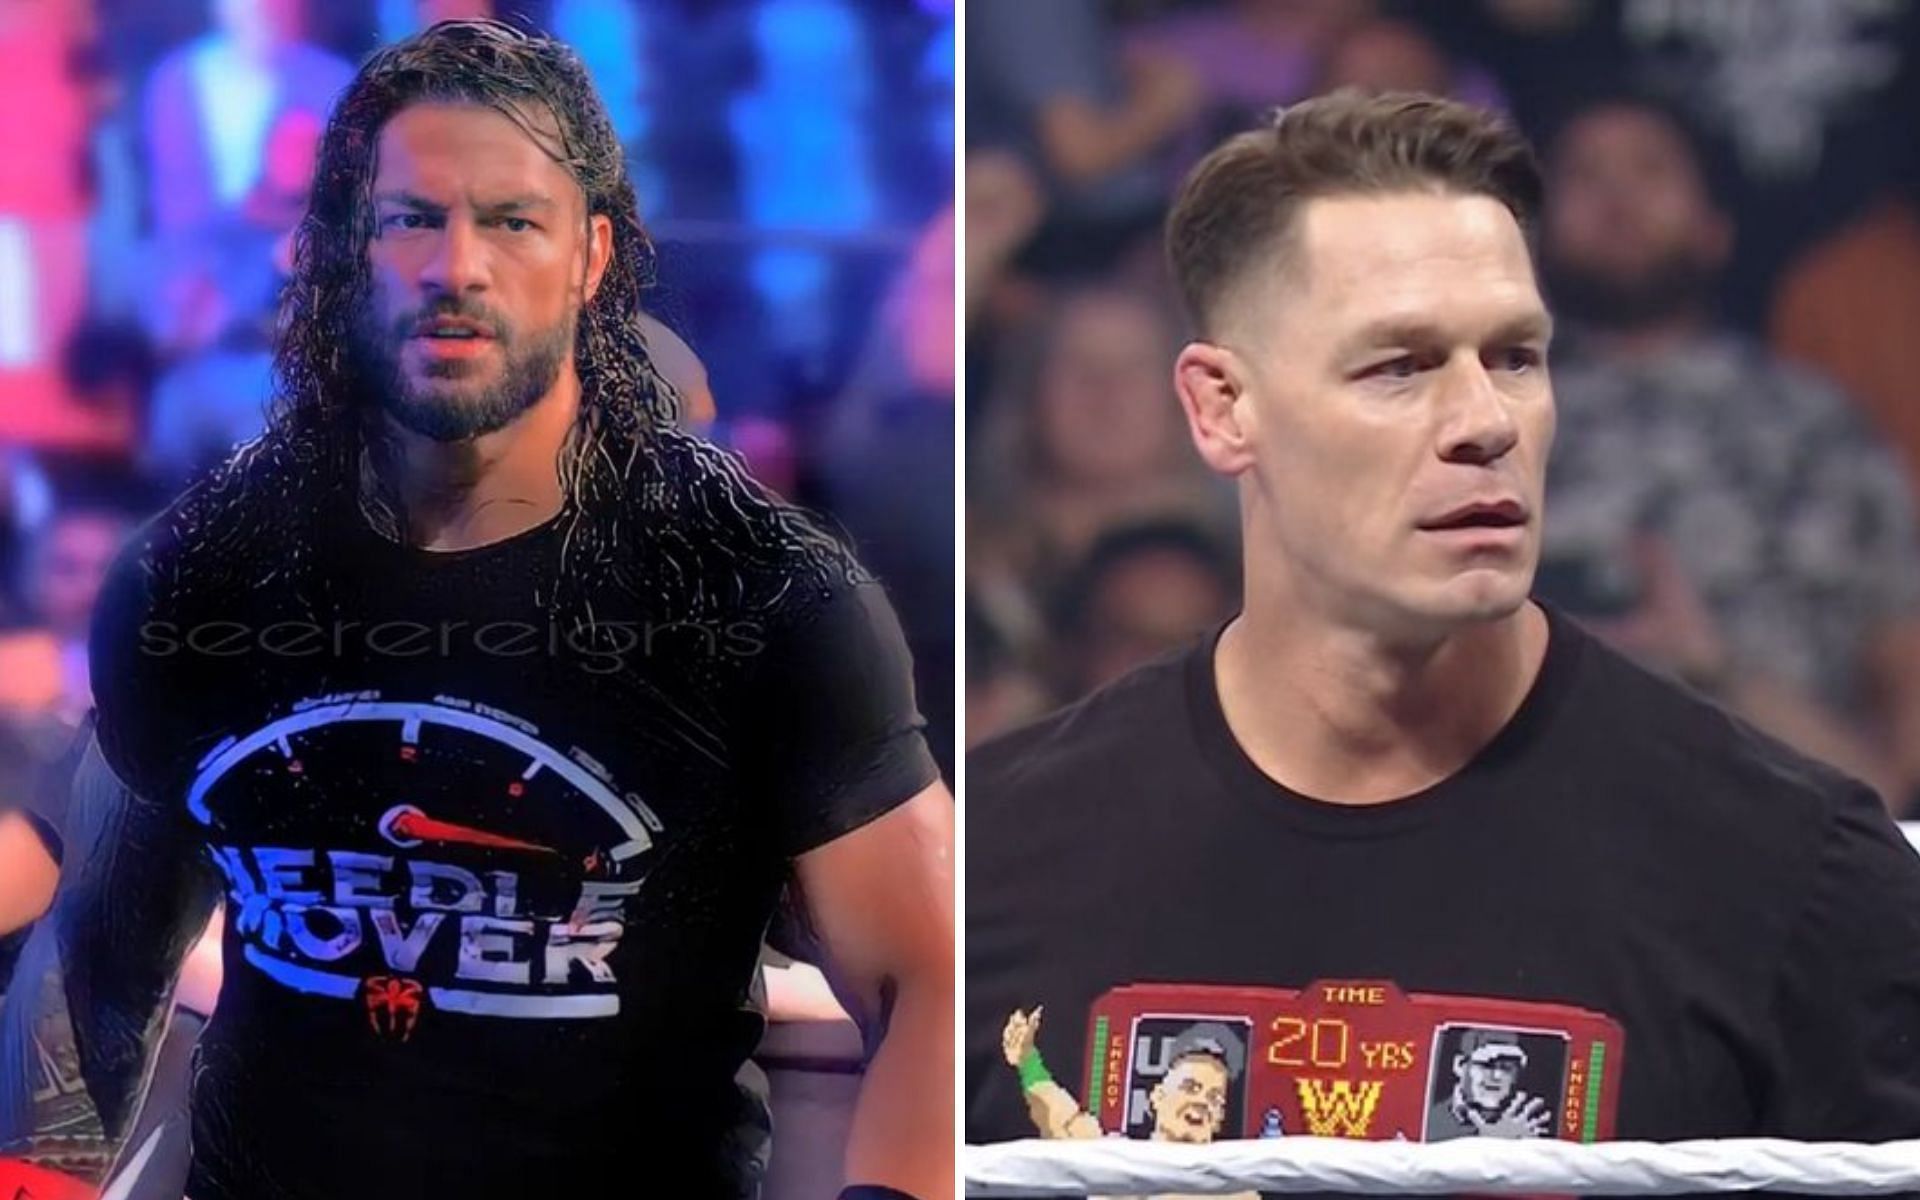 It was a star-studded main event on SmackDown this week